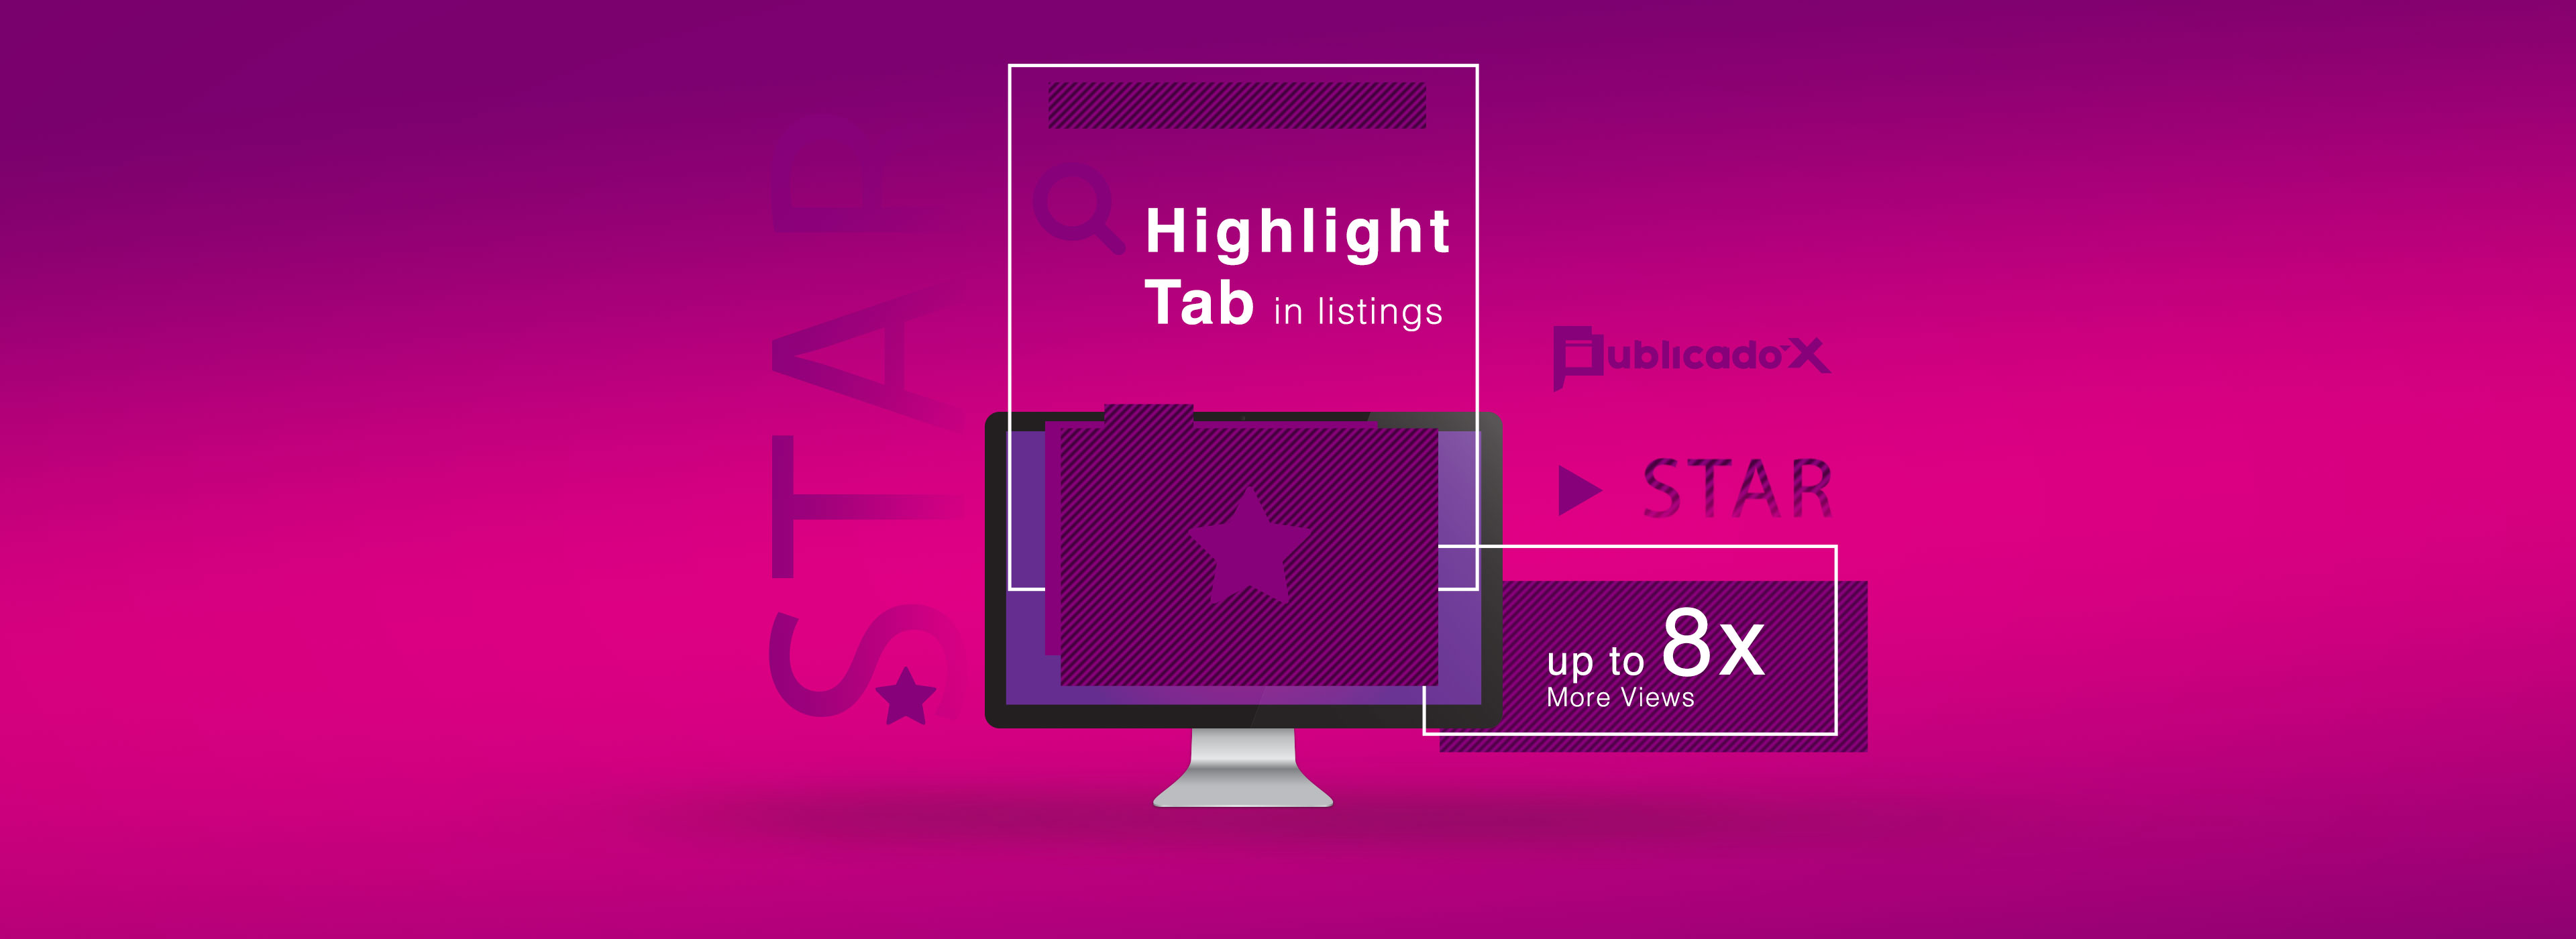 With Star Highlight your ad will appear on our Homepage in a prominent block, on all pages of the category and you will be able to benefit from 8X more views in up to 1 Month.